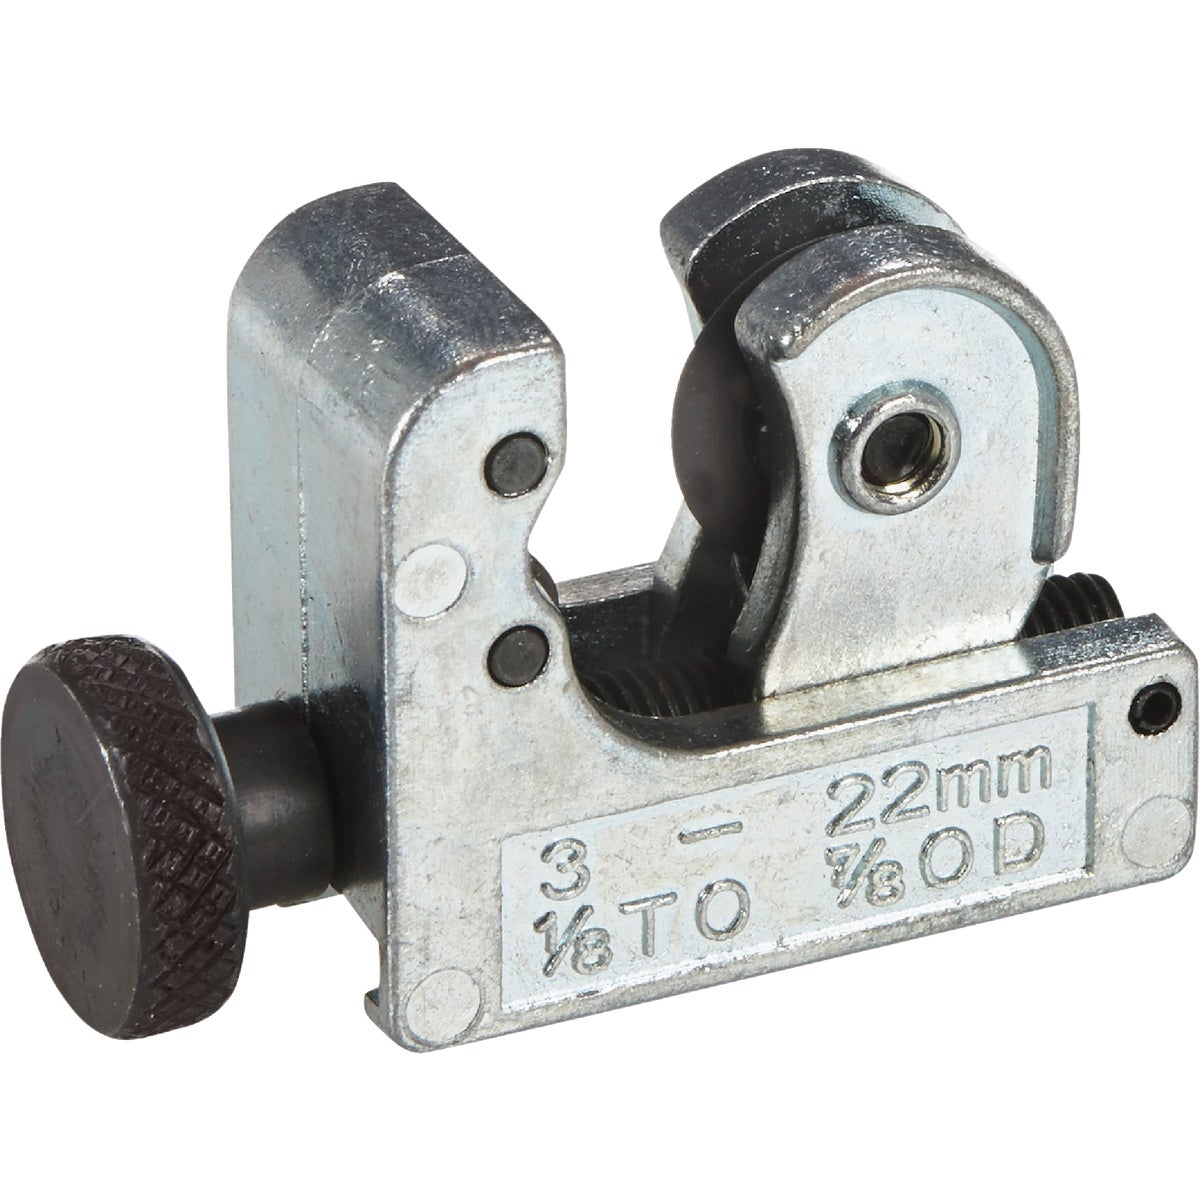 Item 408093, For use in tight spaces. Cutting capacity 1/8-inch O.D. through 7/8-inch O.